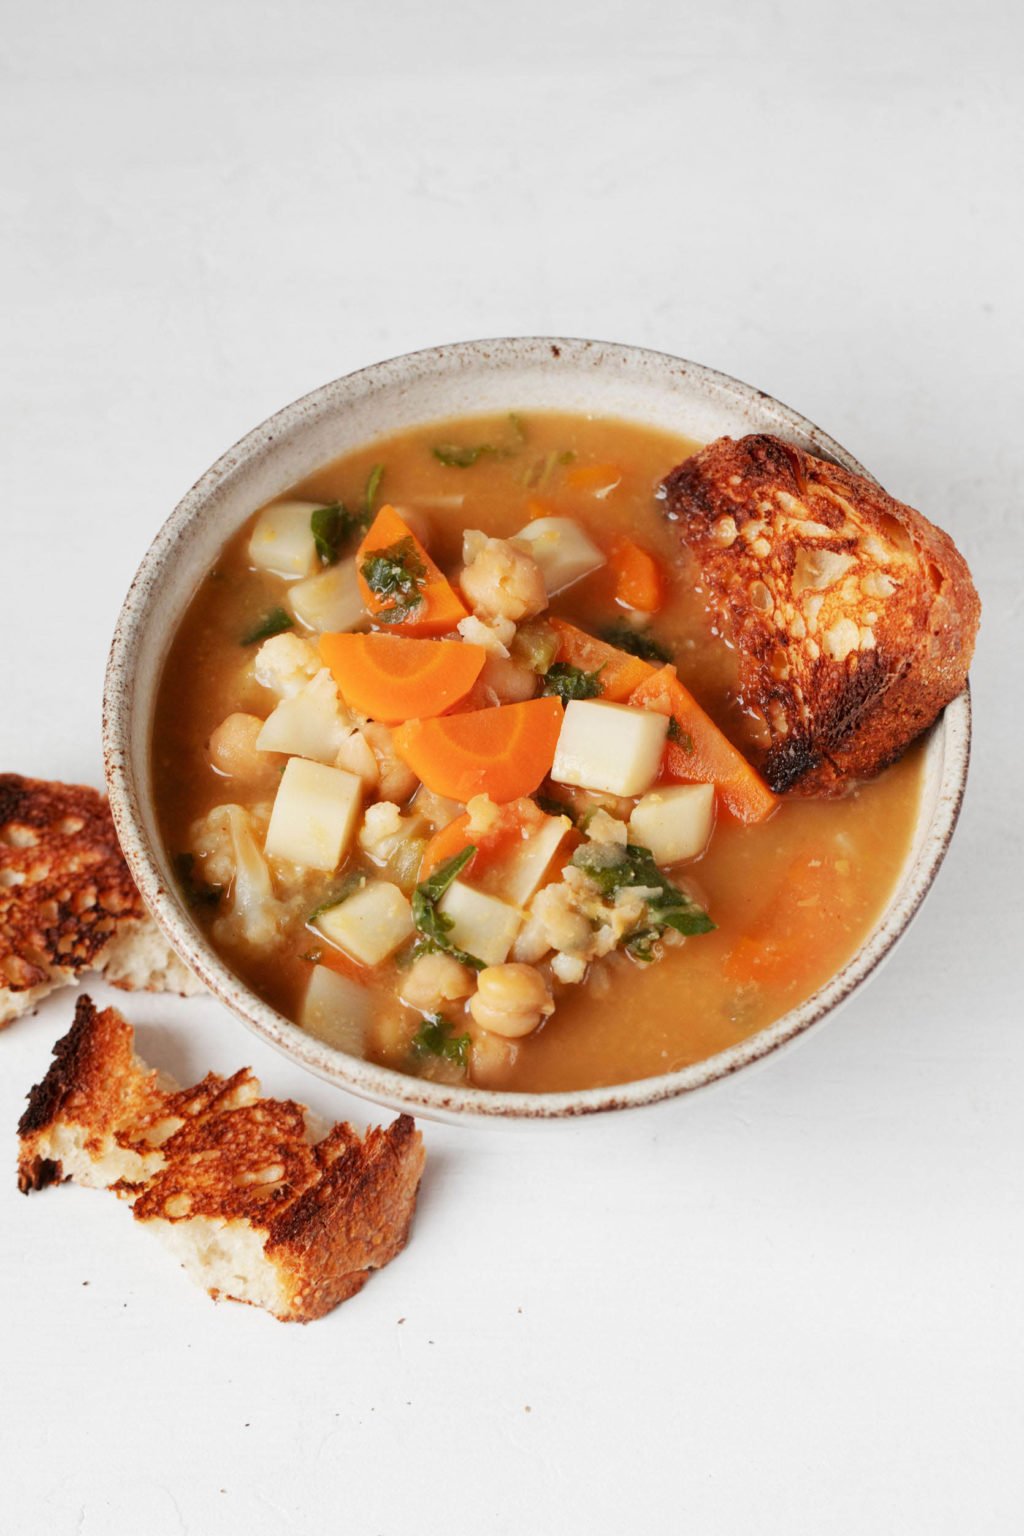 A soup bowl has been filled with a miso vegetable stew and is served with toasted bread. It sits on a white surface.